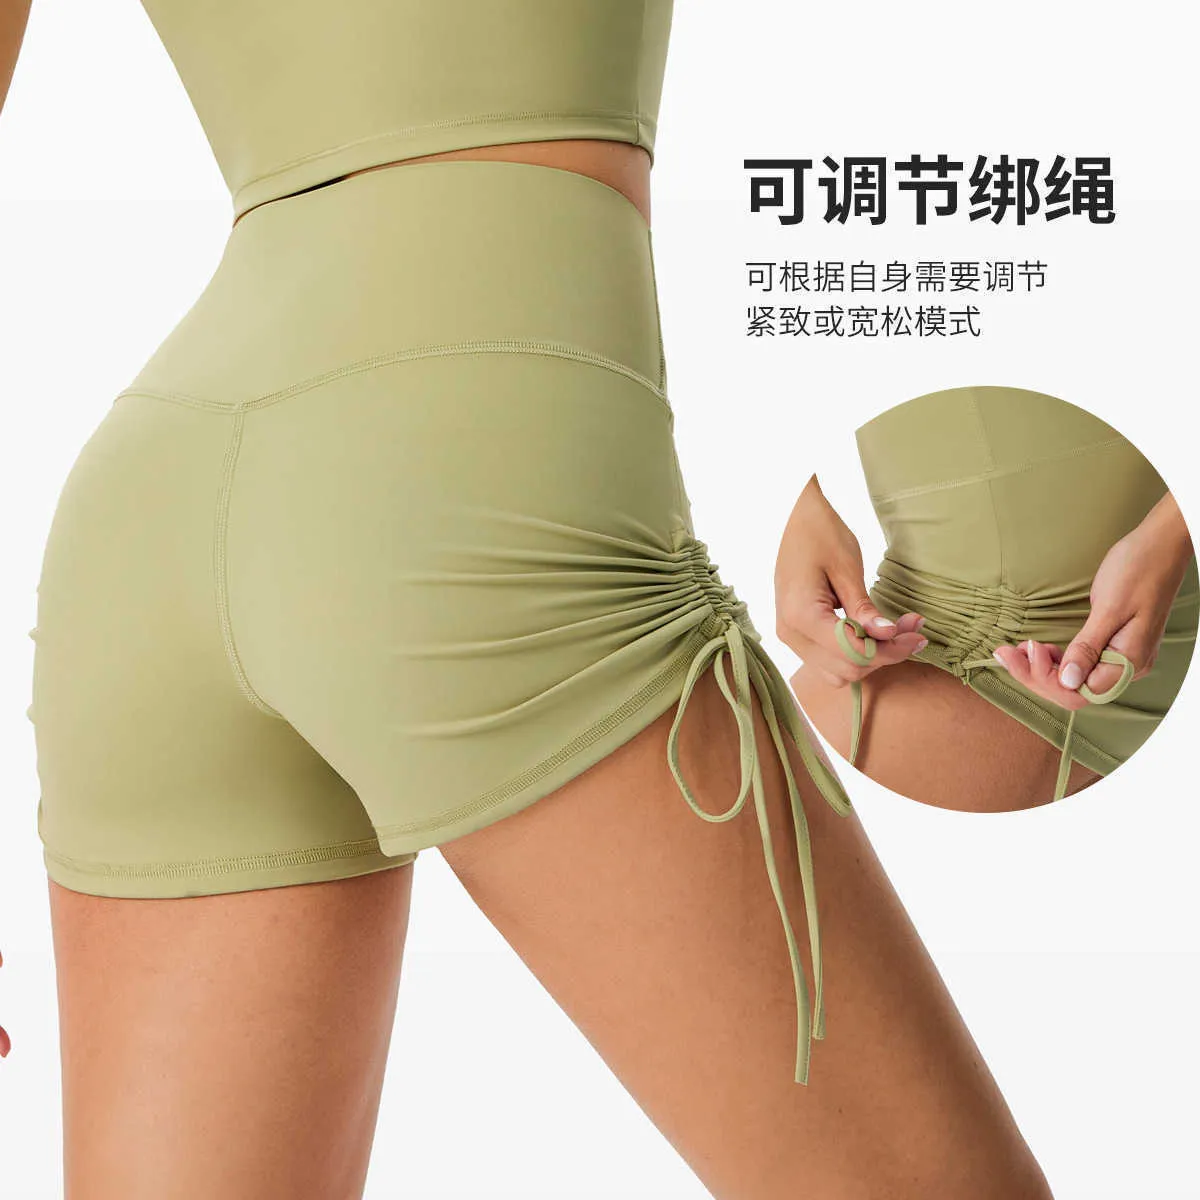 Sports Drawstring Peach Yoga Outfits Shorts Bacteriostasis Fitness Running Hot Pants High Waist Casual Female Underwear